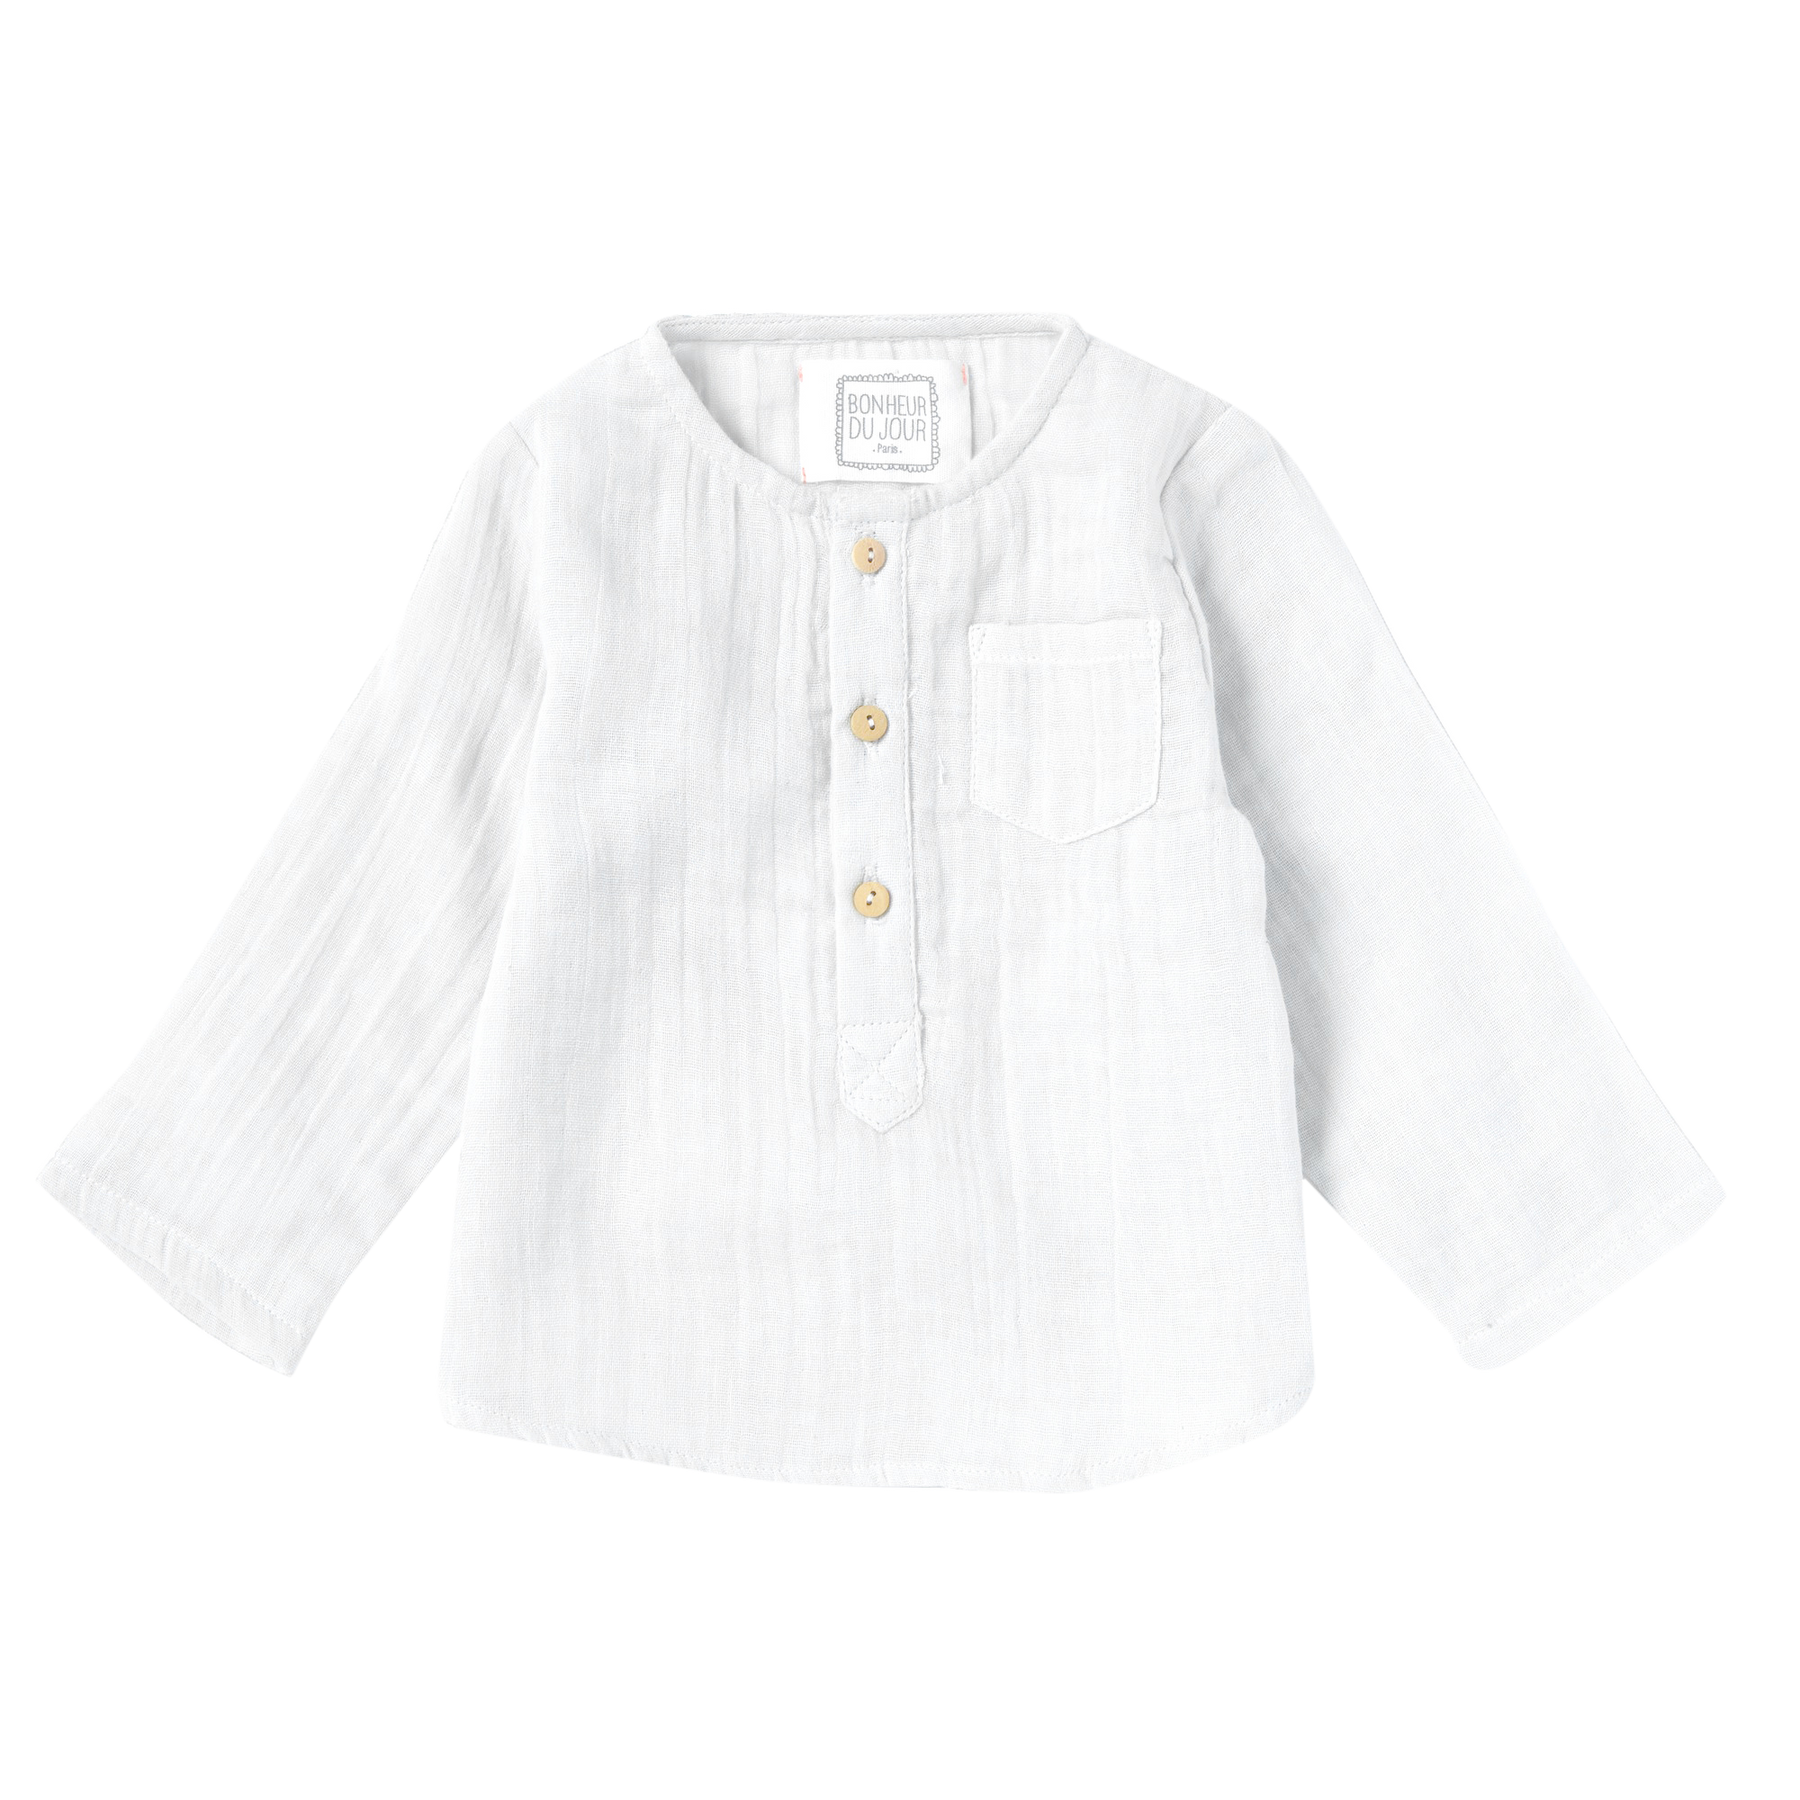 100% Cotton Shirt with Wooden Booties / White